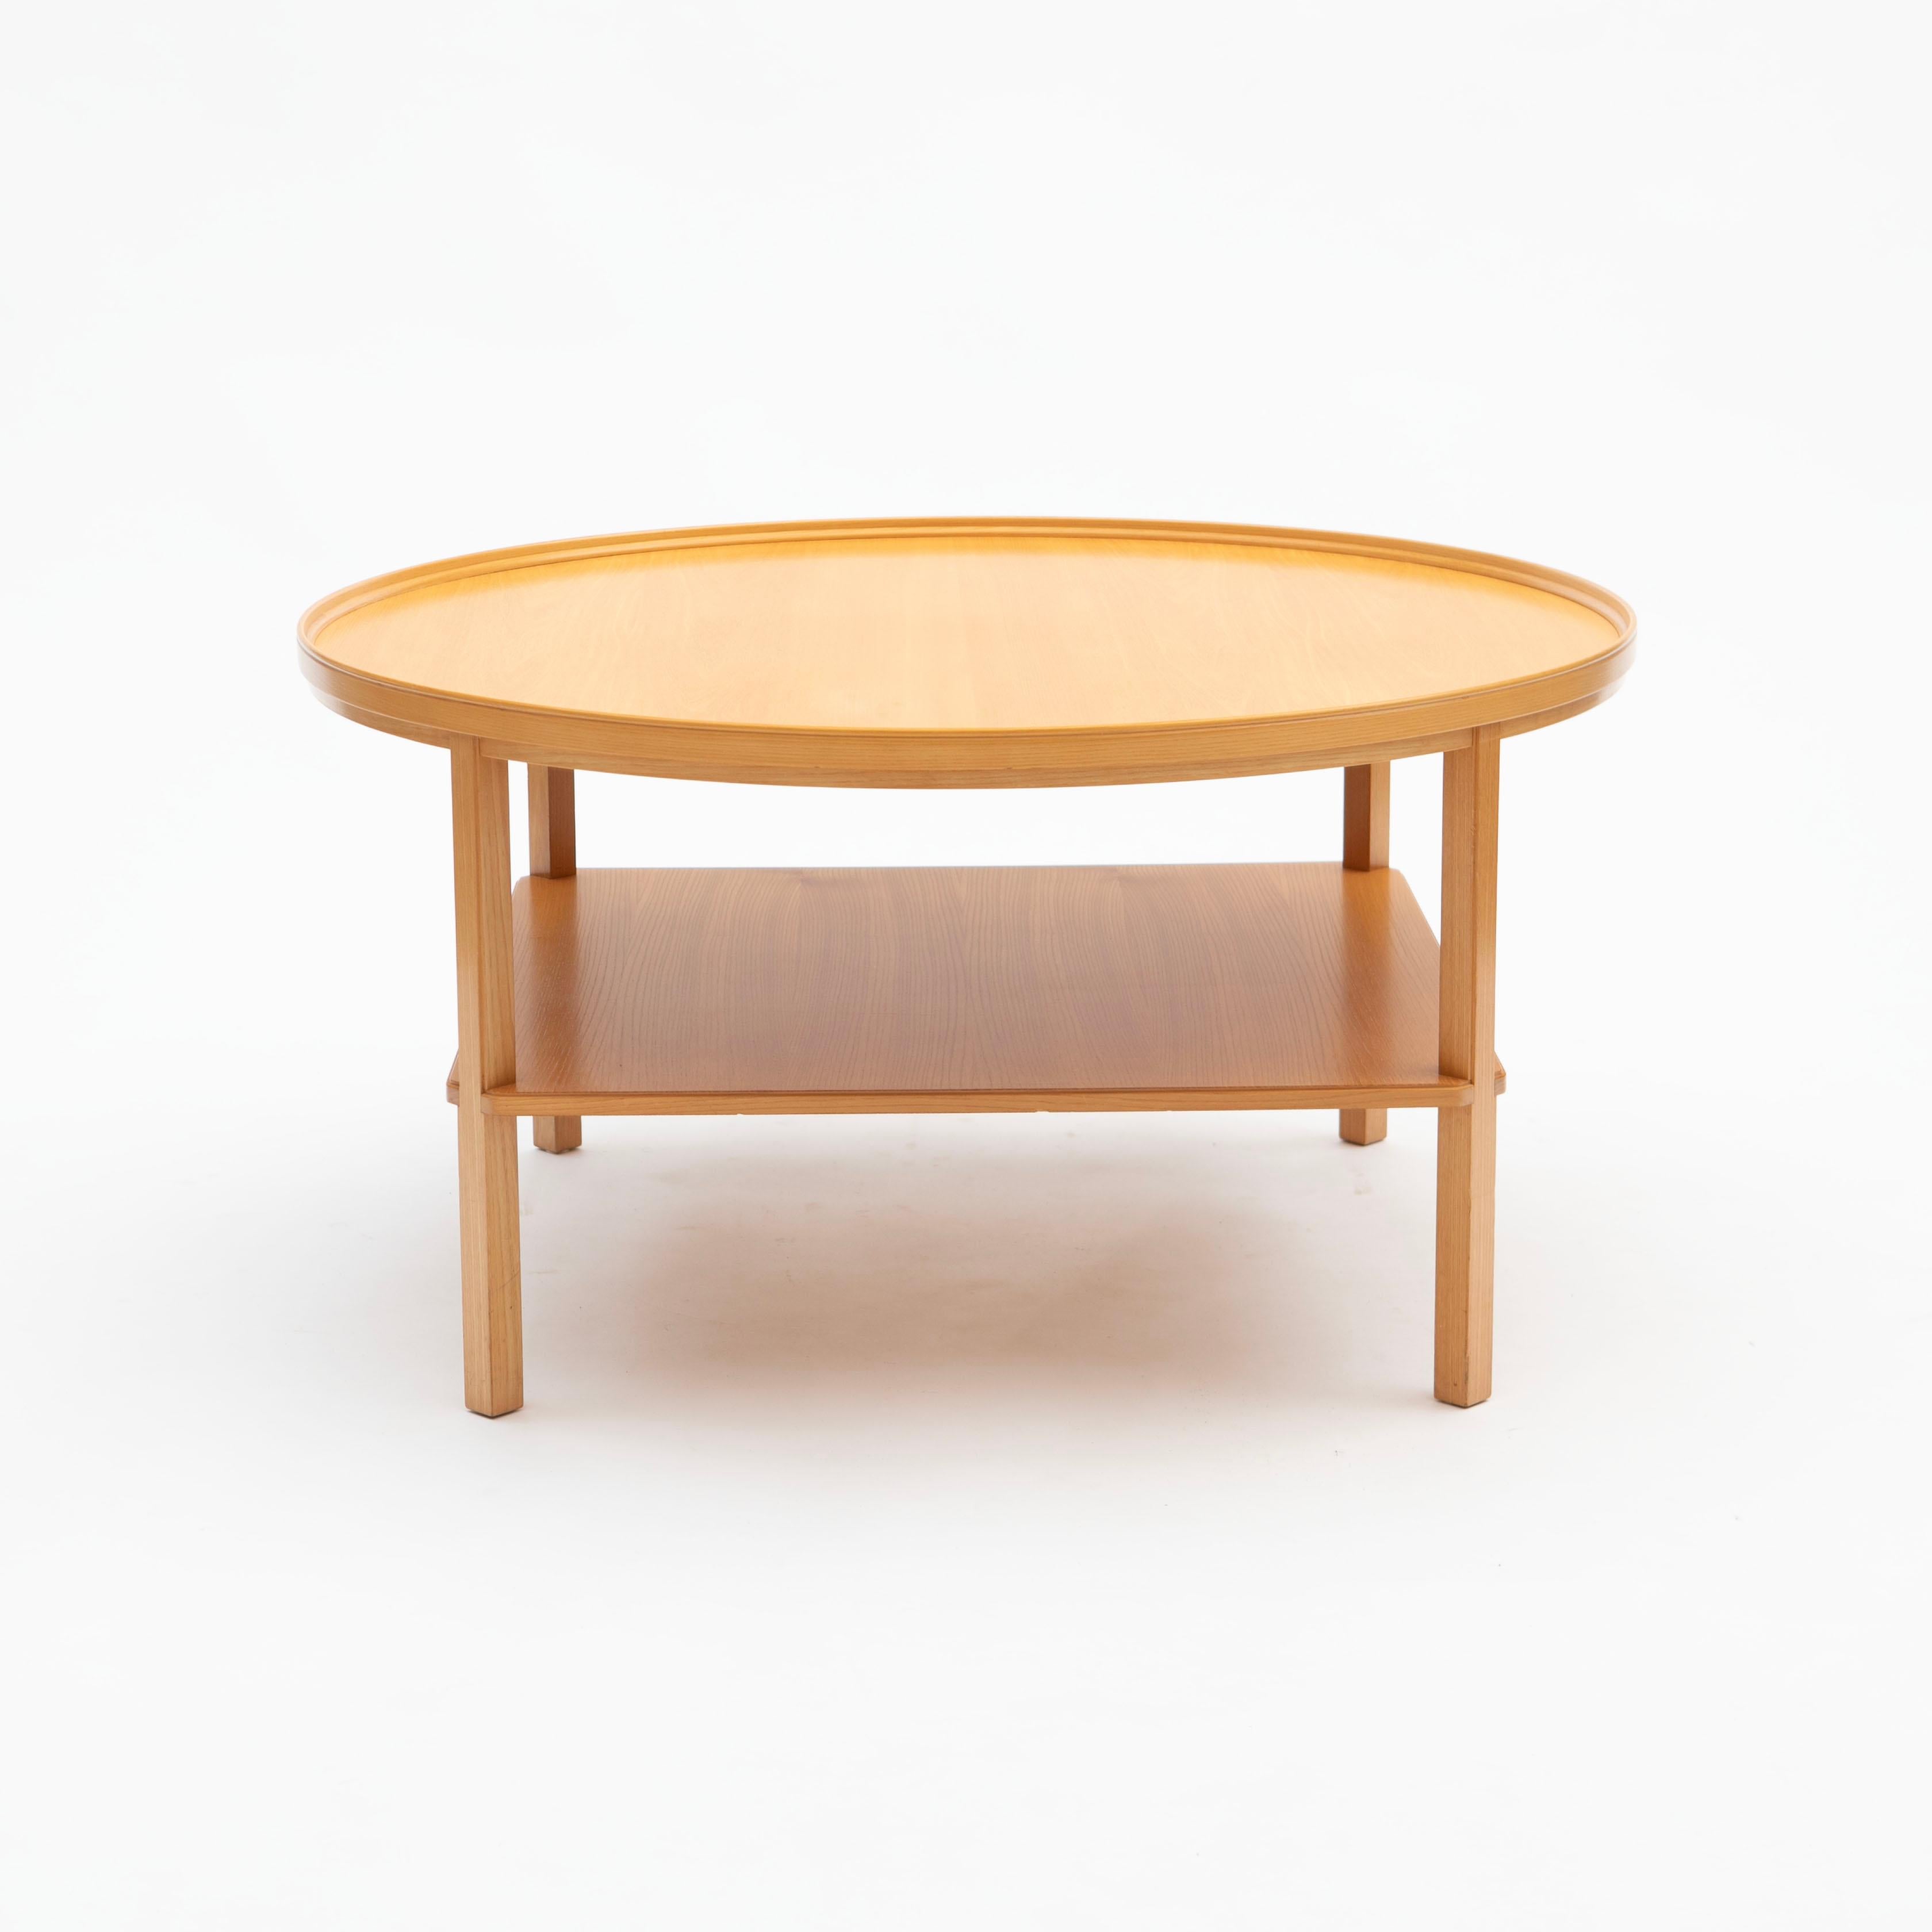 Kaare Klint 1888 - 1954.
Round coffee table, “Rygebord” model KK6687, made in ash wood with a very beautiful grain. The table features an elegant, raised band that wraps around the tabletop with a functional shelf below, supported by slightly angled